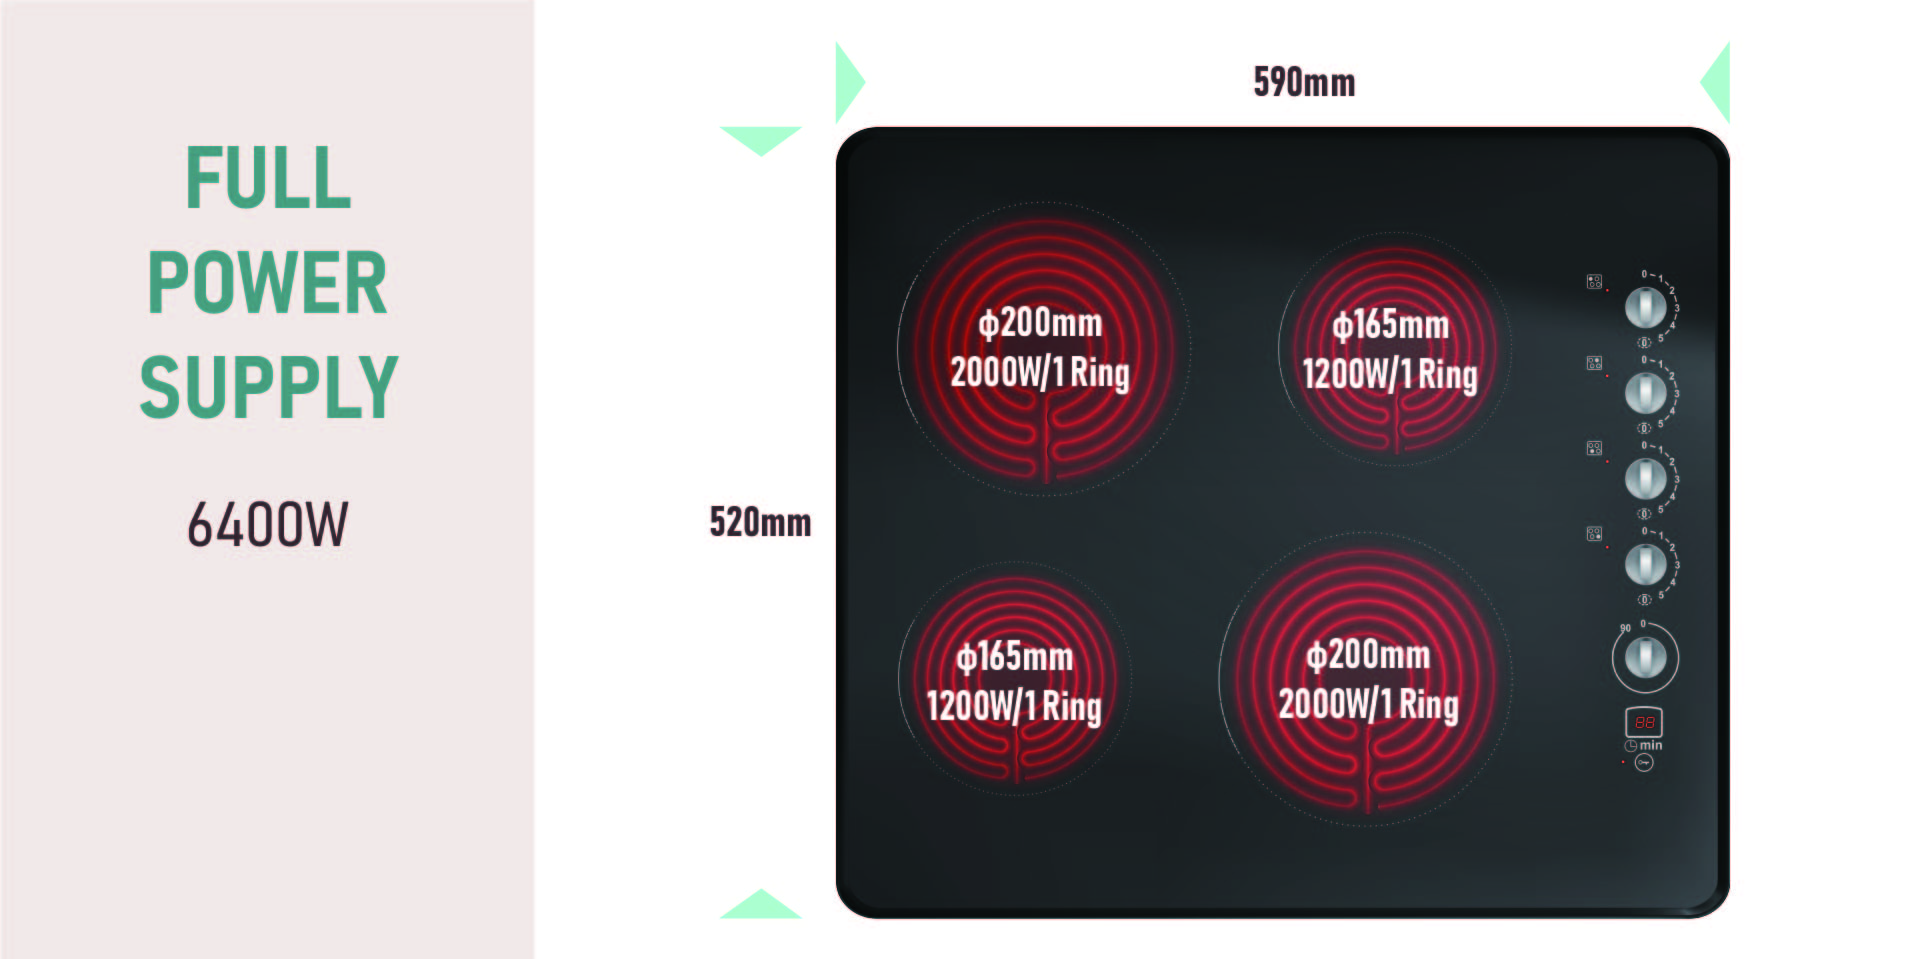 Customized 600mm Built-in 4 Zone Ceramic Cooktop with Knob Control manufacturers From China | เหลา